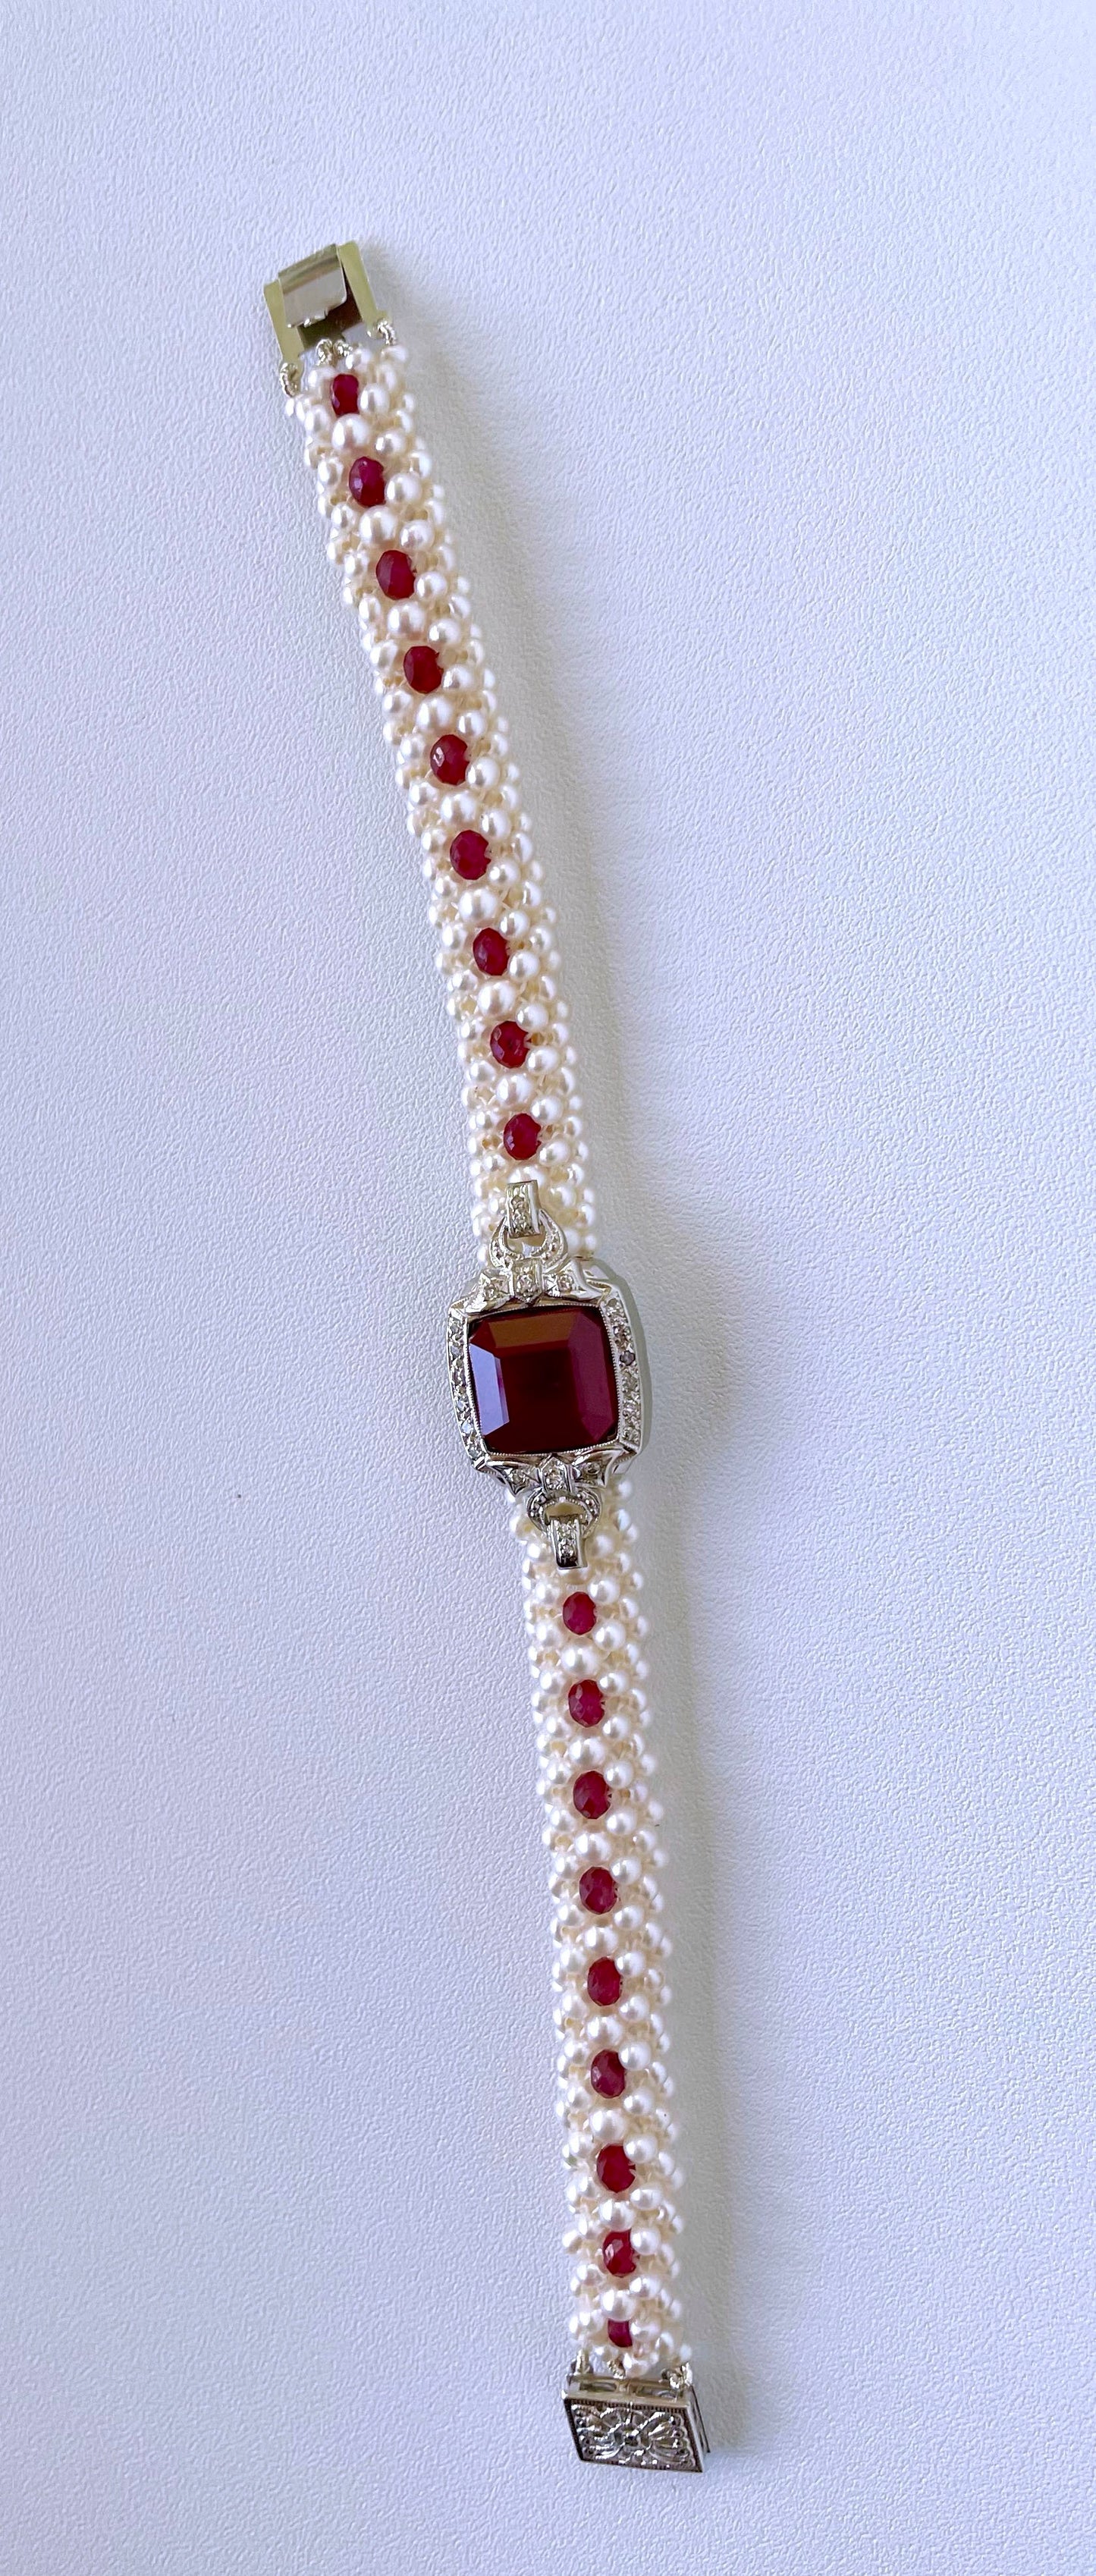 Woven Pearl, Ruby & Diamond Encrusted Bracelet with 14k White Gold